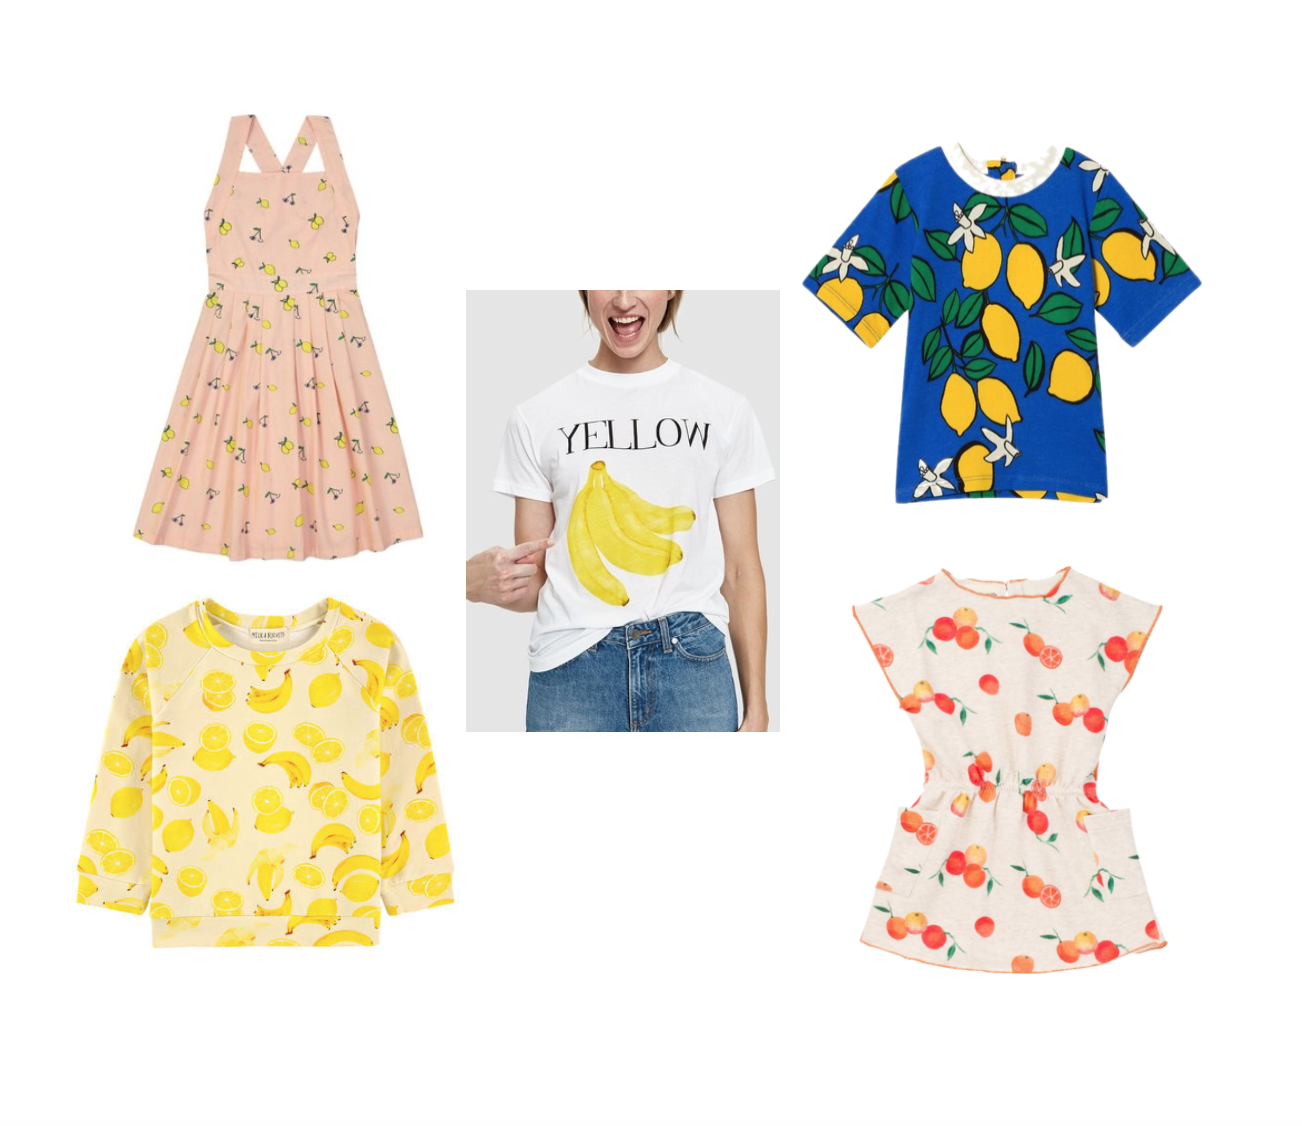 Third Eye Chic Fashion Kids Fashion And Lifestyle Blog For The Modern Families Kids Fashion Blog Fruit Inspired Summer Style Part 2